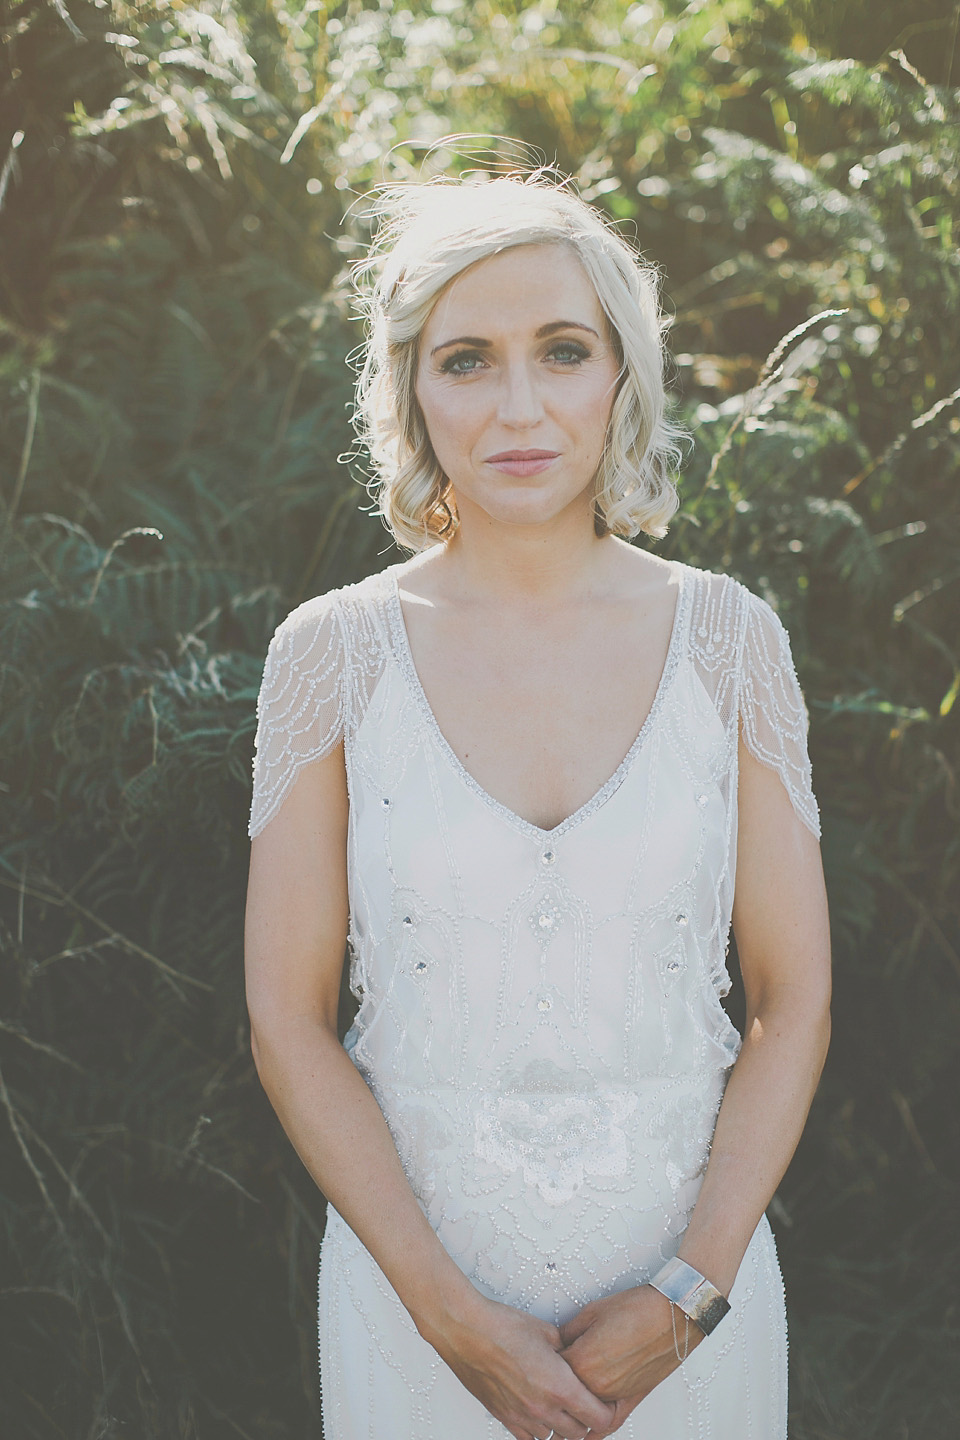 A bride wearing Eden by Jenny Packham for her coastal and rustic inspired wedding at Danby Castle in the North Yorkshire Moors. Photography by James Melia.